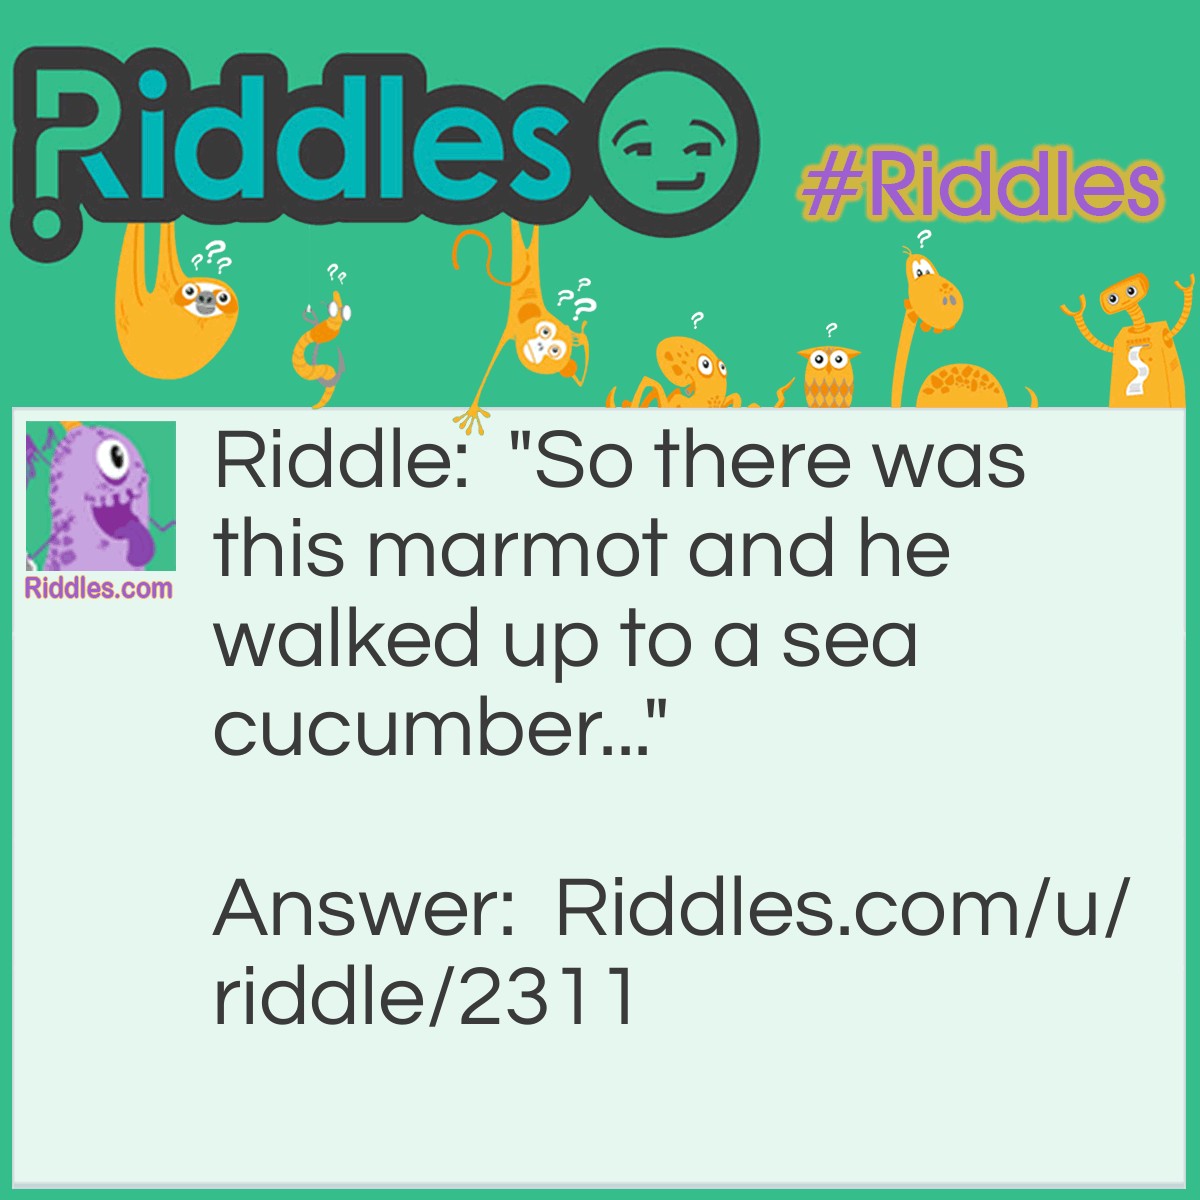 Riddle: "So there was this marmot and he walked up to a sea cucumber..." Answer: Finding Nemo.